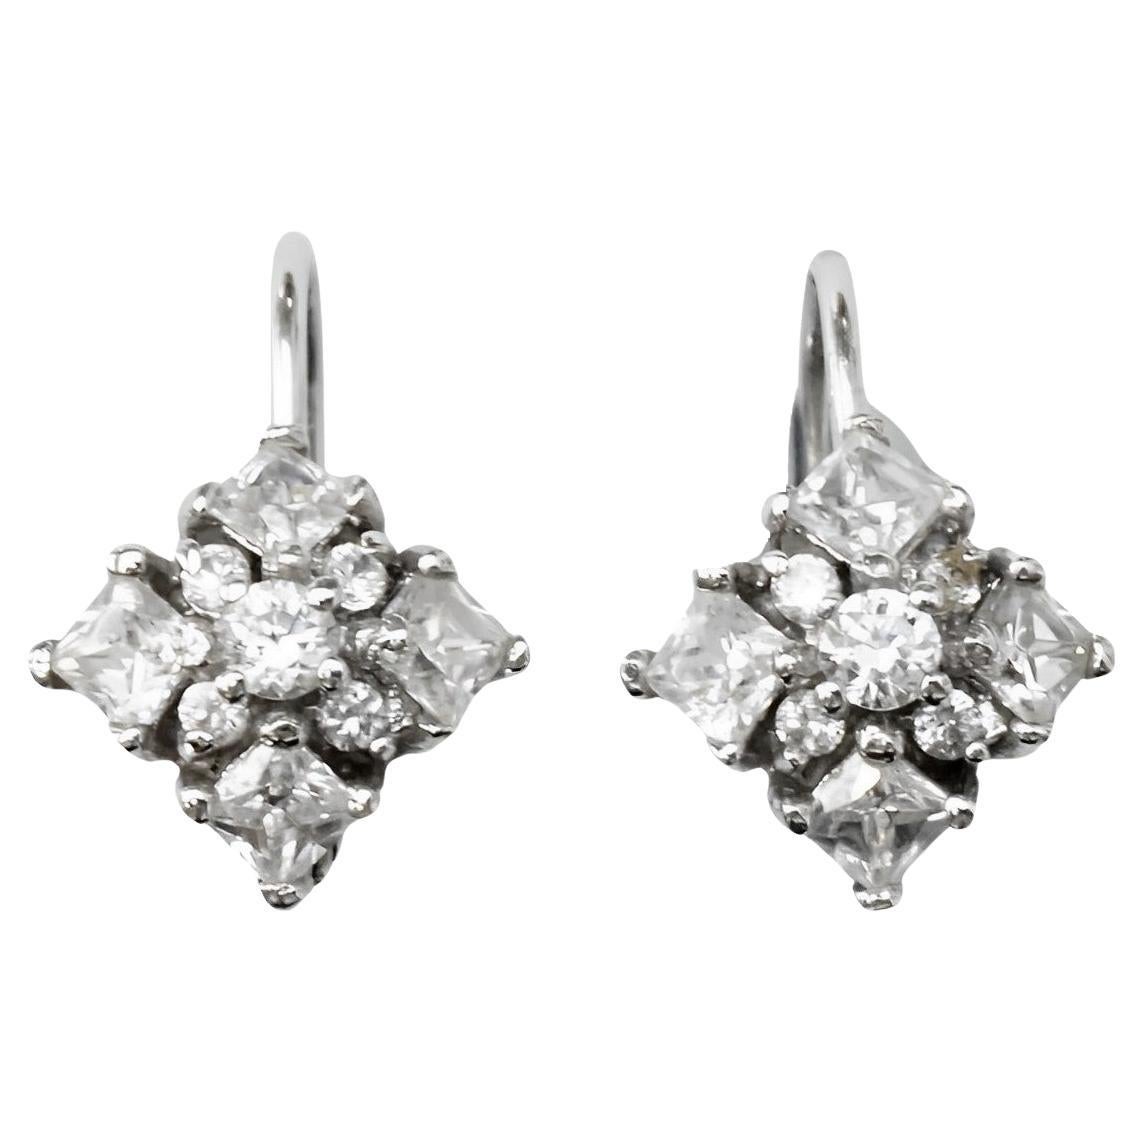 Sterling Silver and Rhinestone Lever Back Earrings For Sale